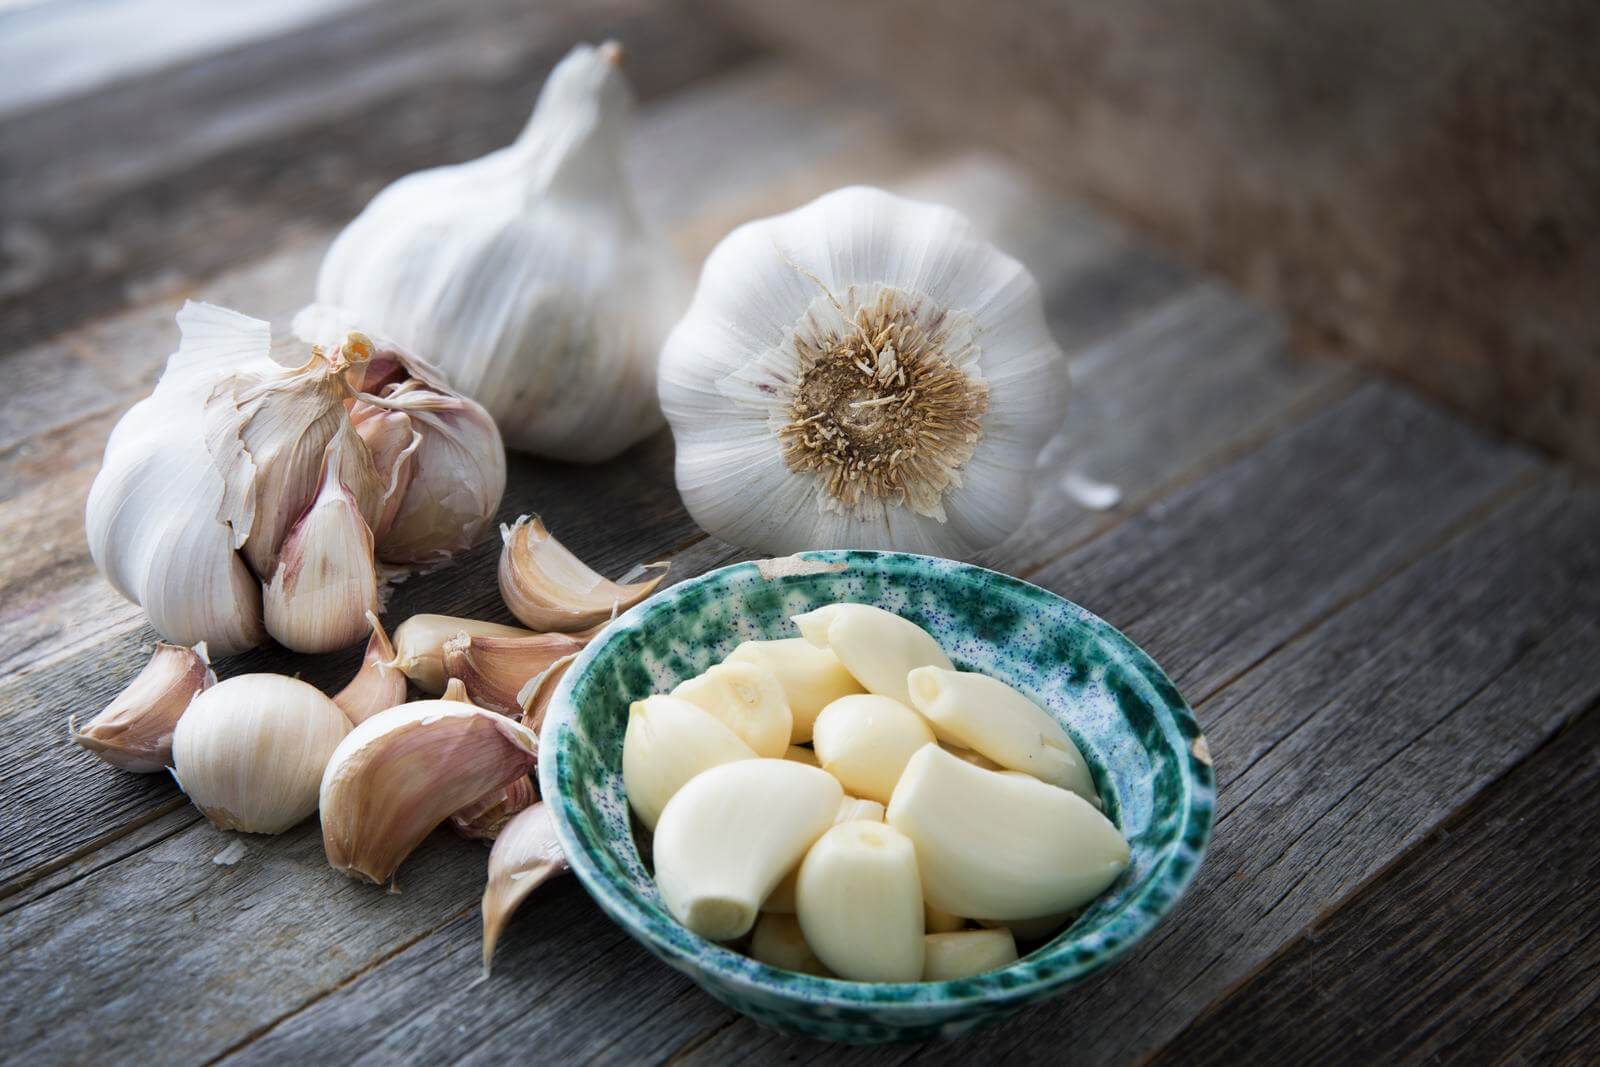 Bowl of peeled garlic cloves in bowl with more cloves and garlic heads on wooden surface